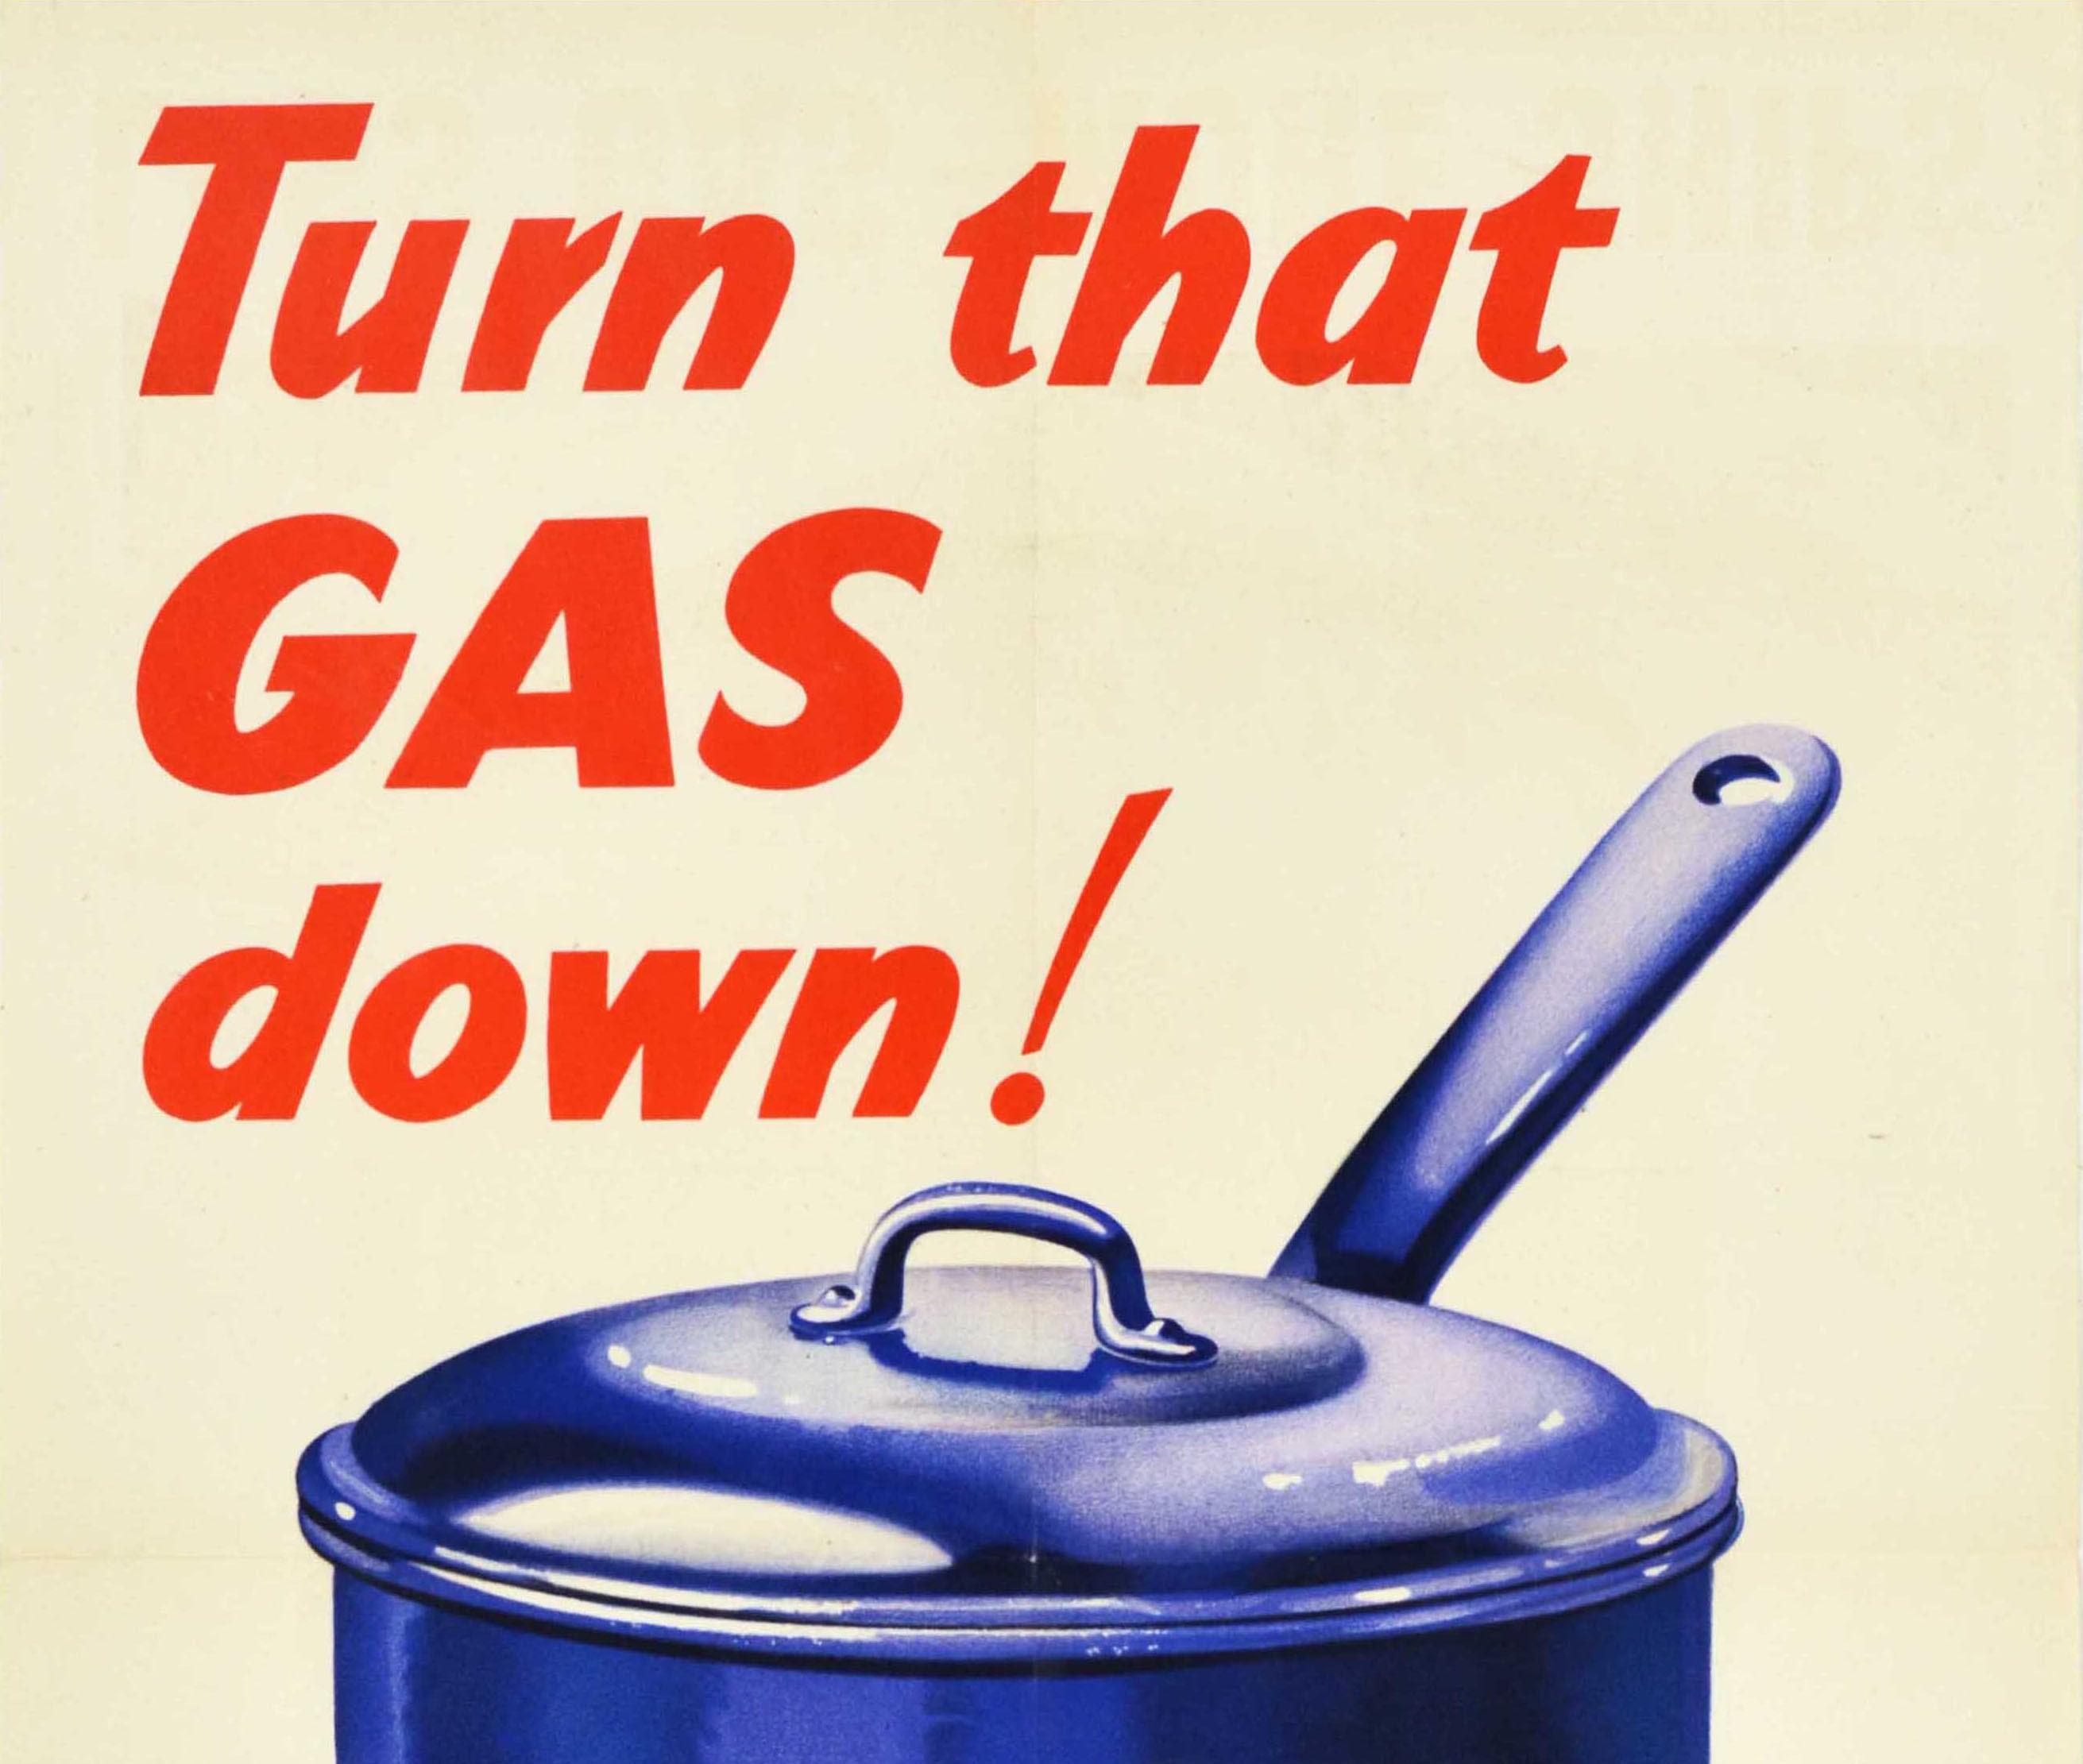 Original vintage World War Two propaganda poster to encourage energy savings - Turn that gas down! Less gas More ships - featuring a pot on a stove with the gas flame on high over the base of it, the bold red and green text above and below. Issued